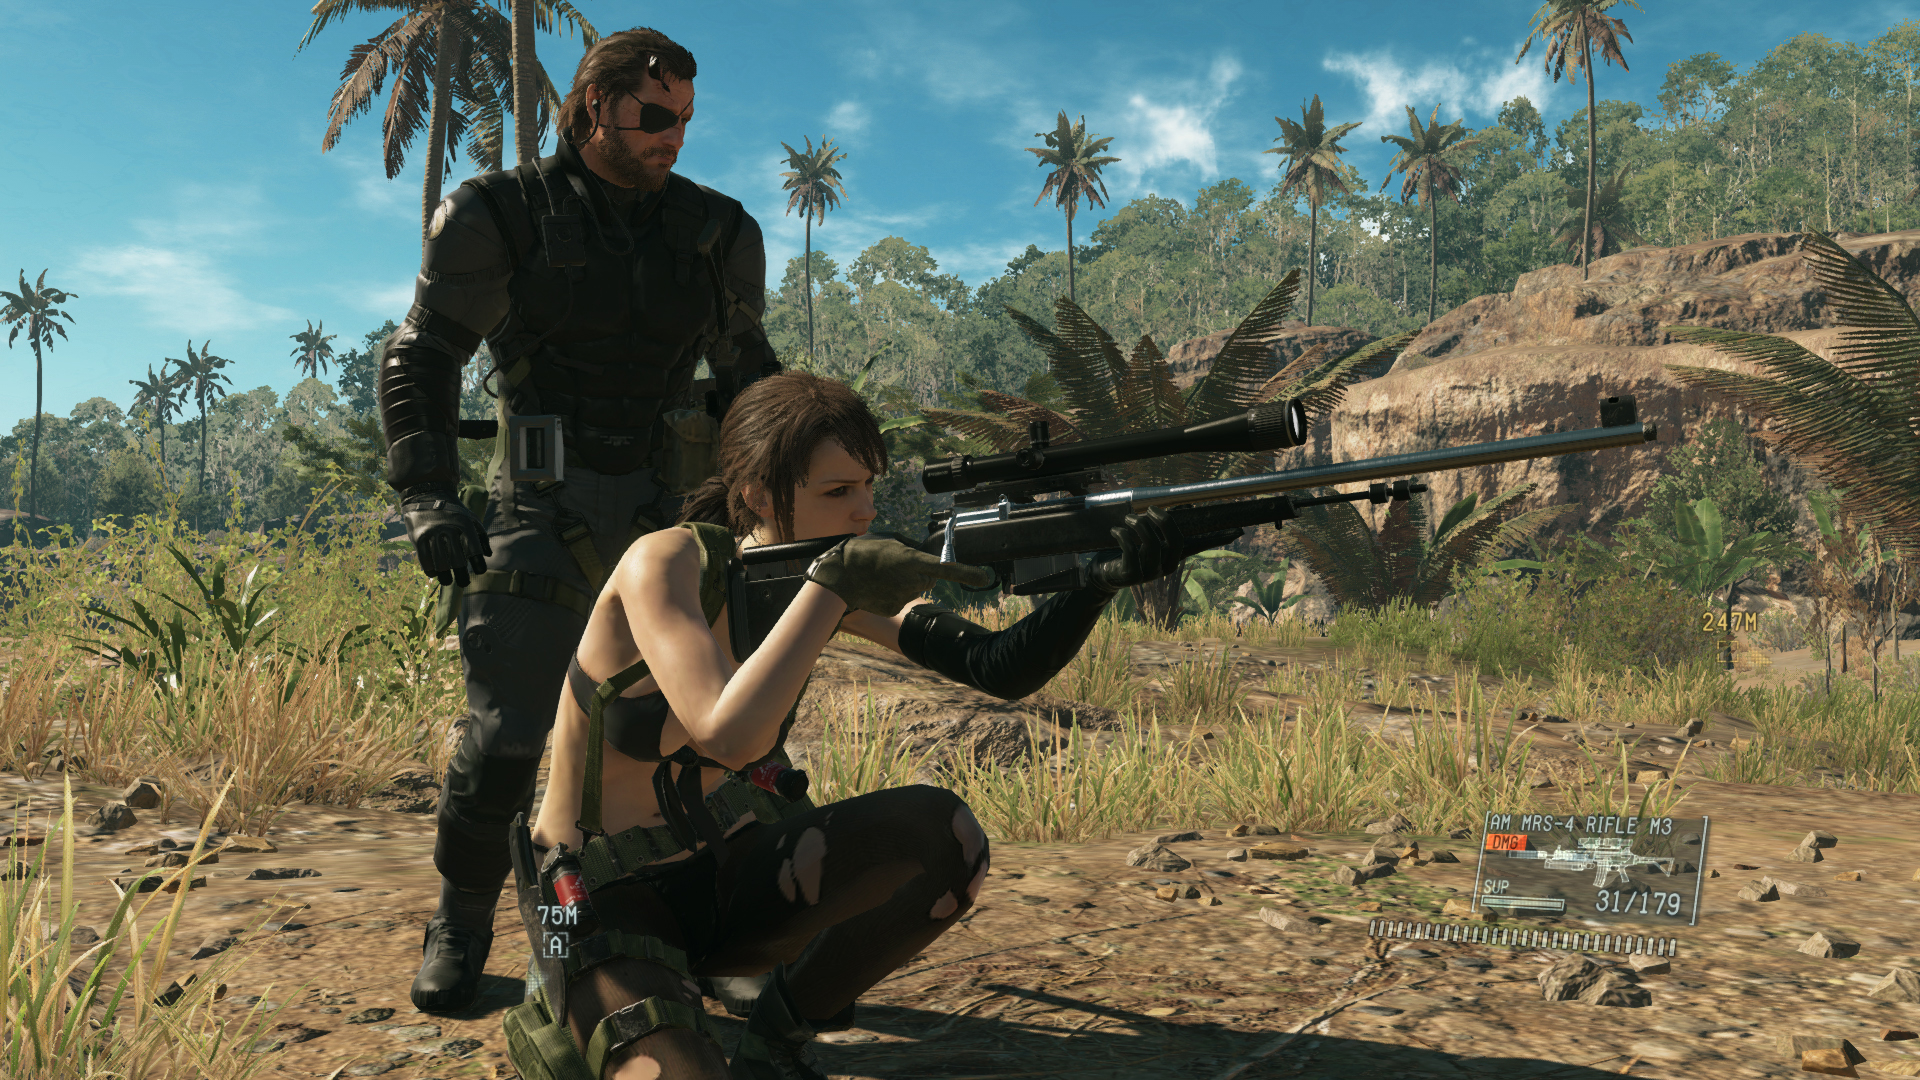 Snake stands above Quiet, who is crouched and aiming down the sights of a sniper rifle